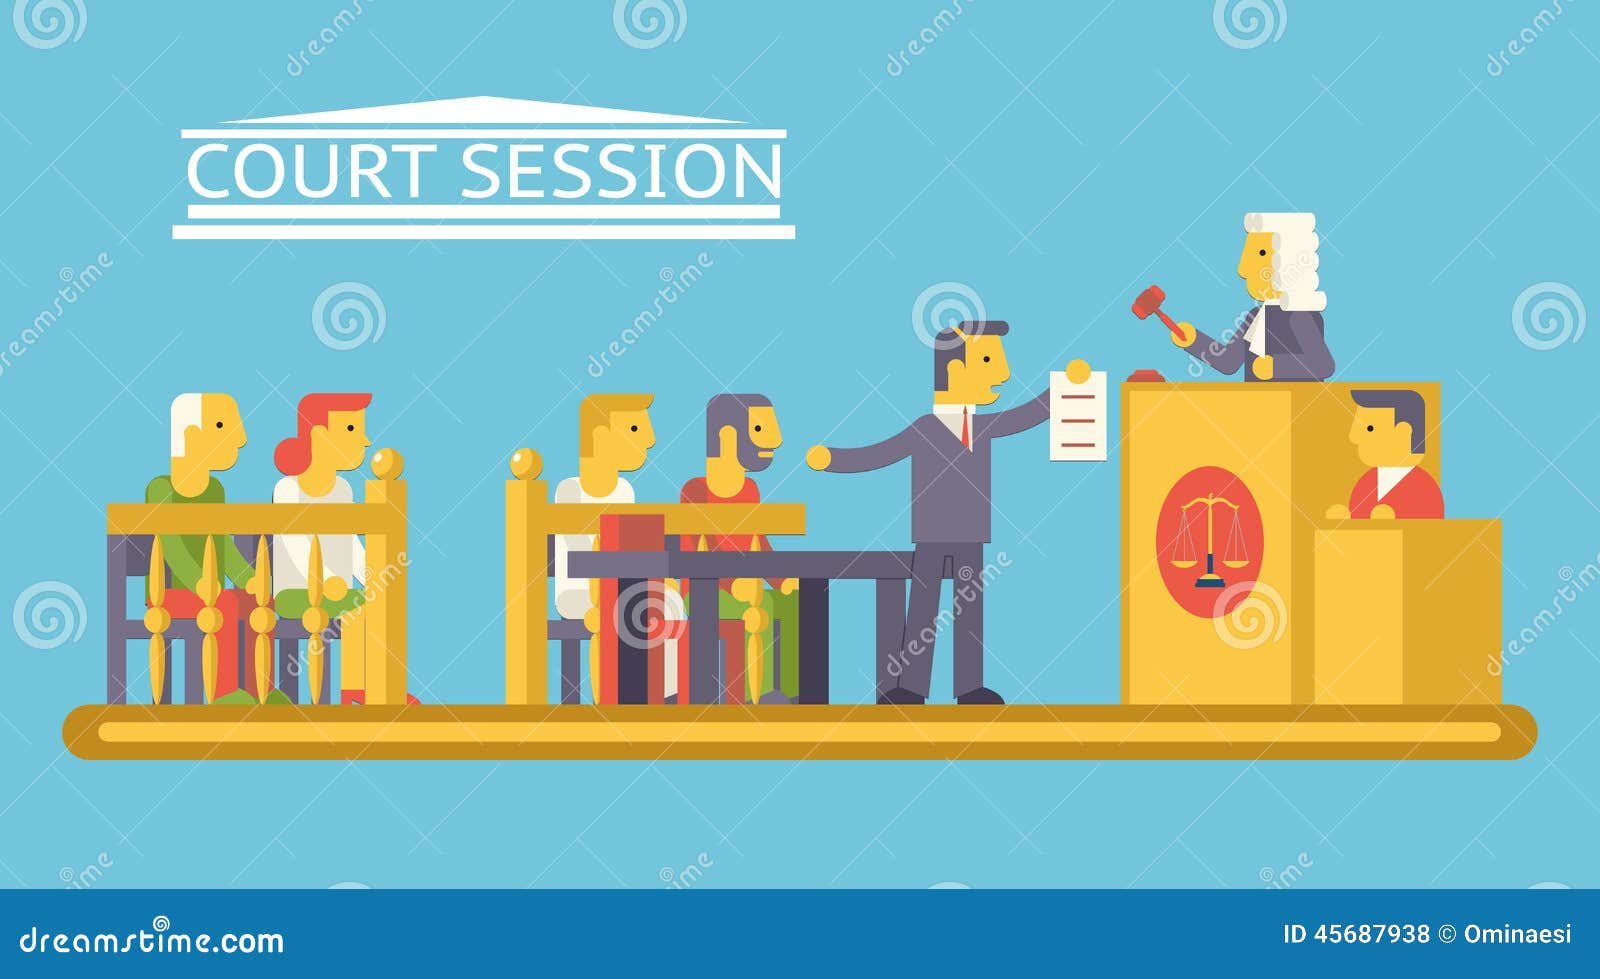 law court justice scene with characters defendant